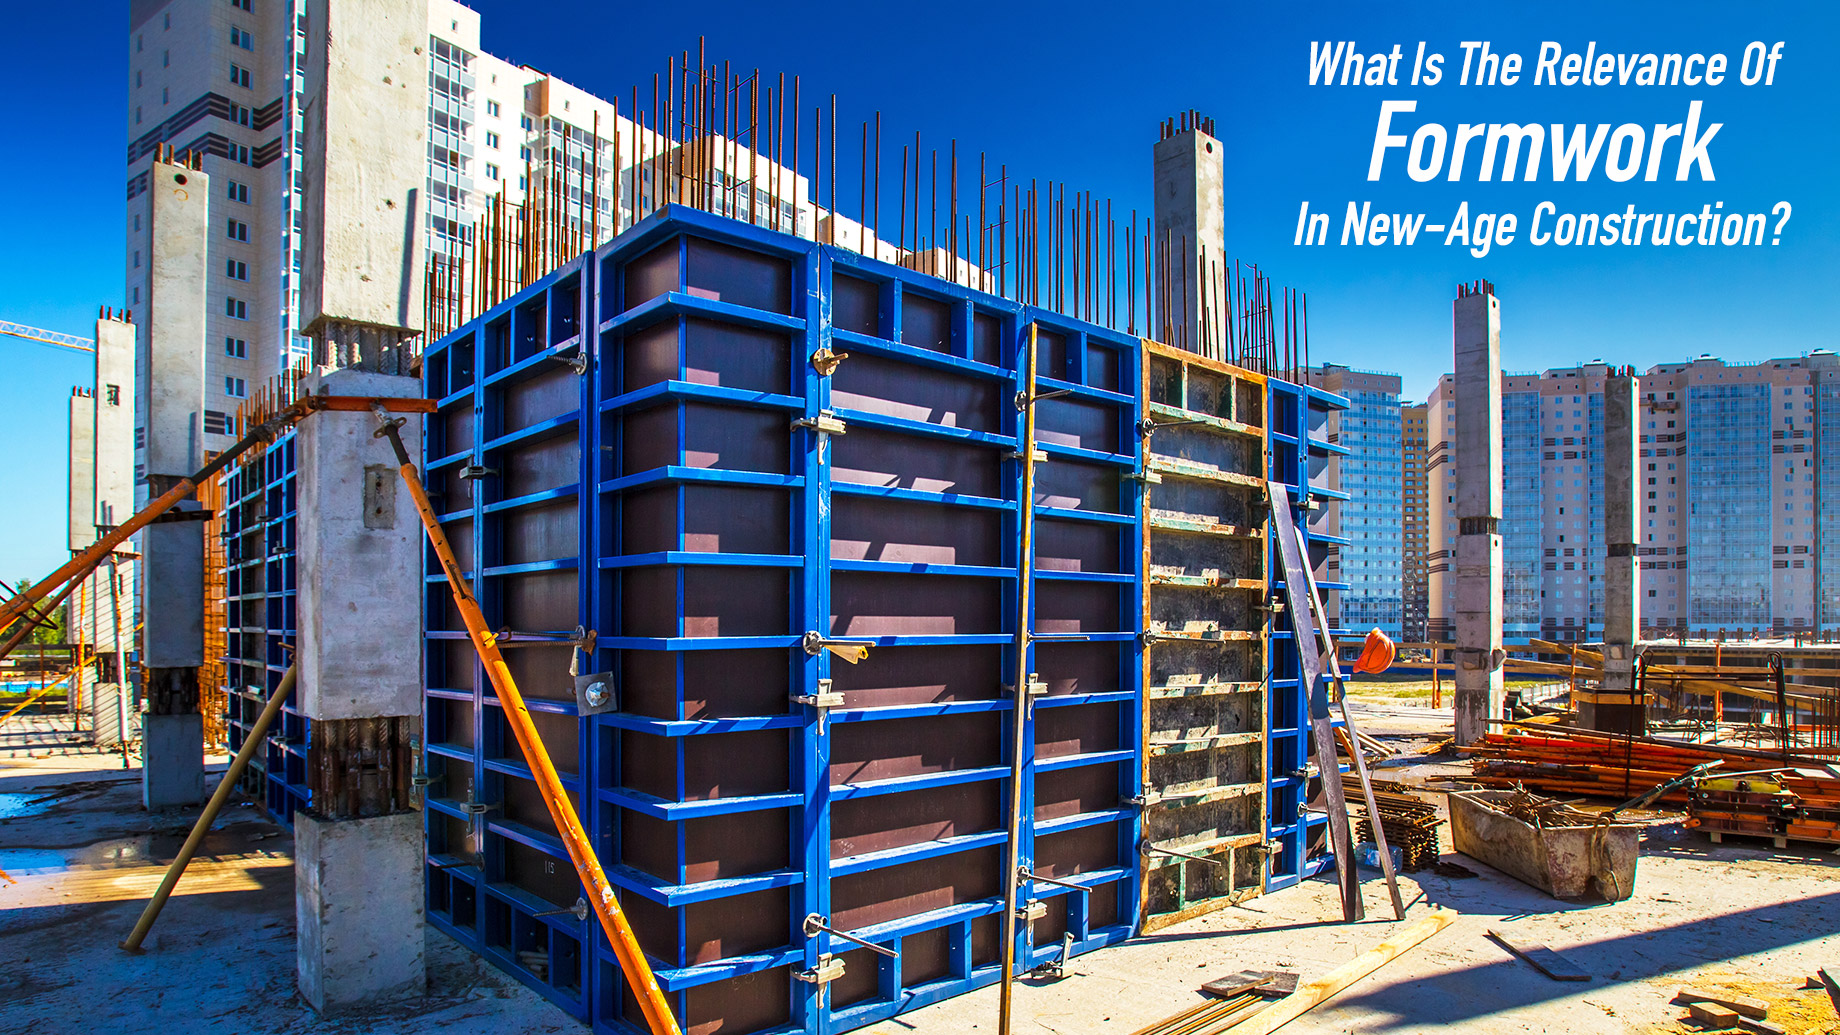 What Is The Relevance Of Formwork In New-Age Construction?